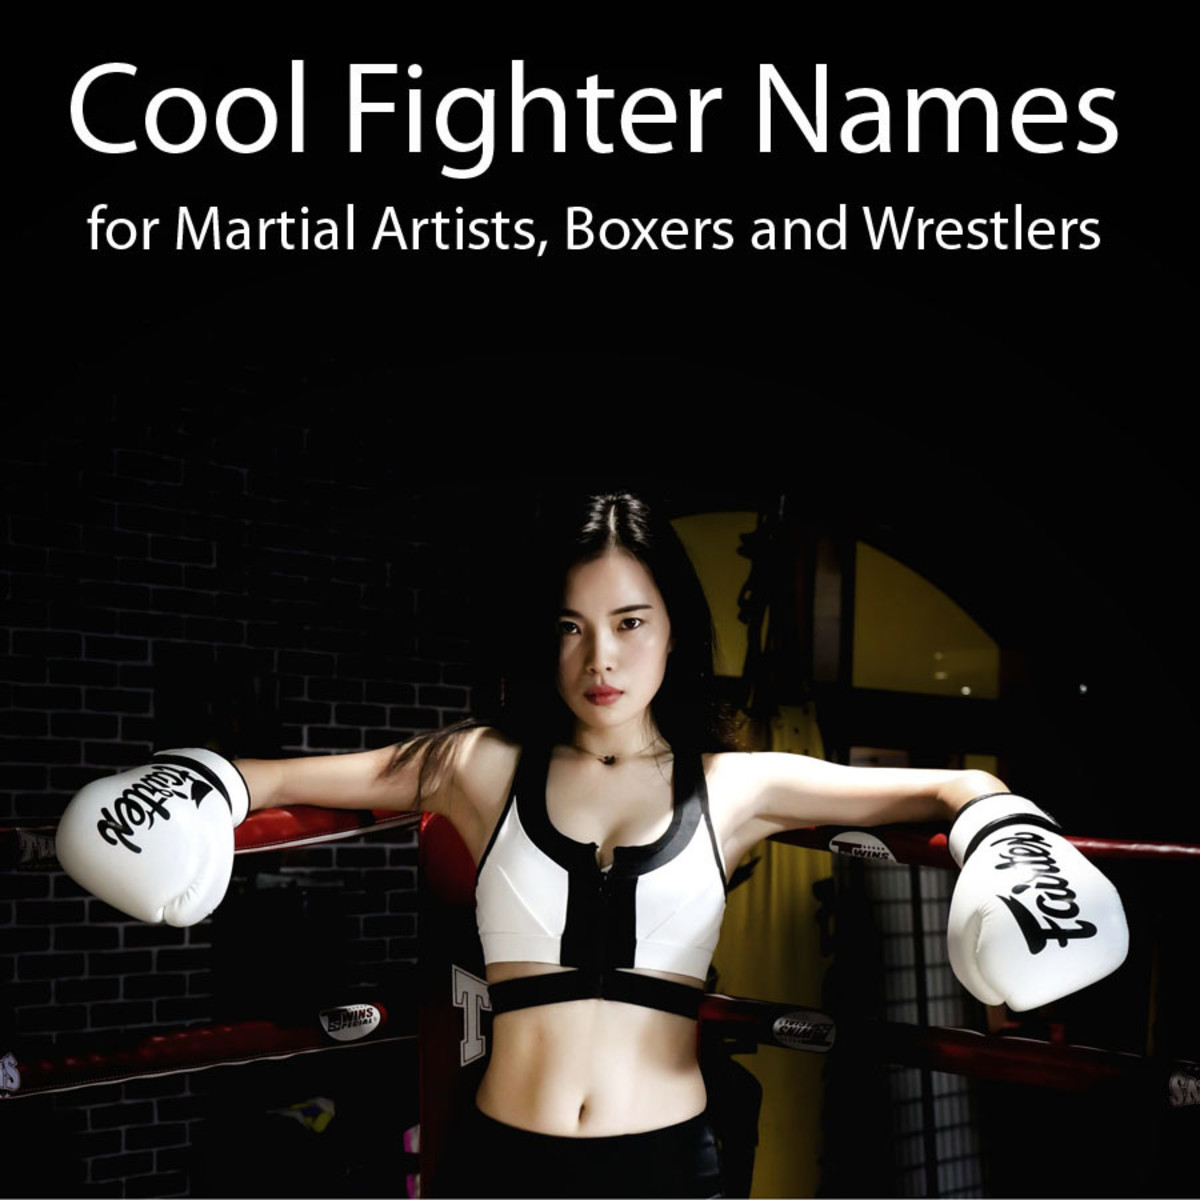 Cool Fighter Nicknames for Martial Artists, Boxers, and Wrestlers